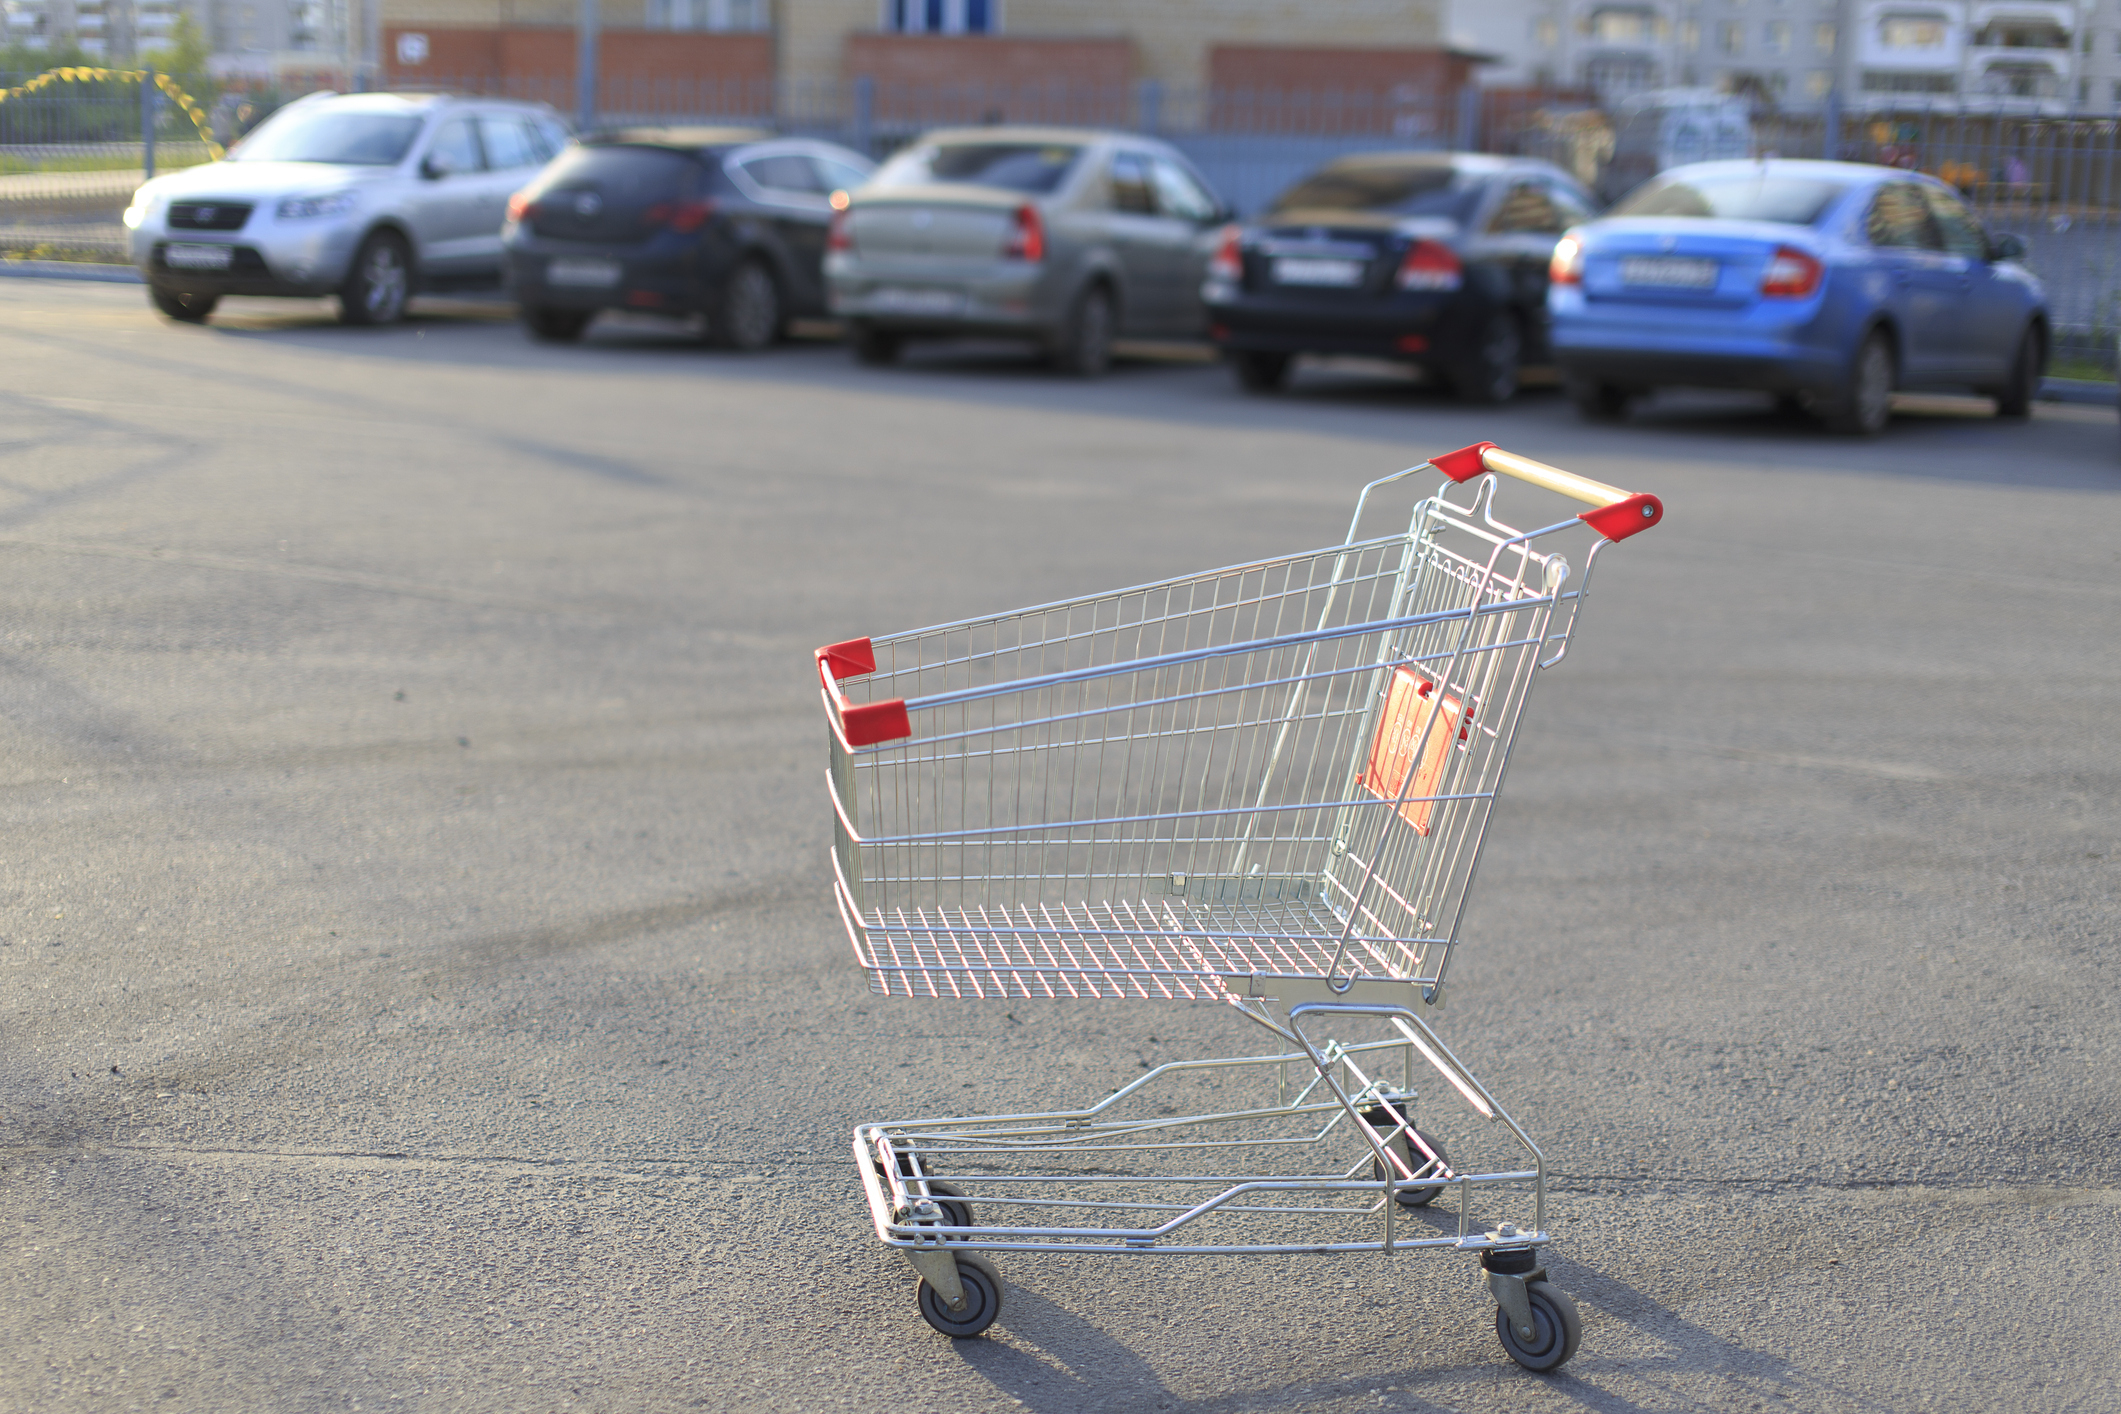 Empty shopping cart left unattended in a parking lot